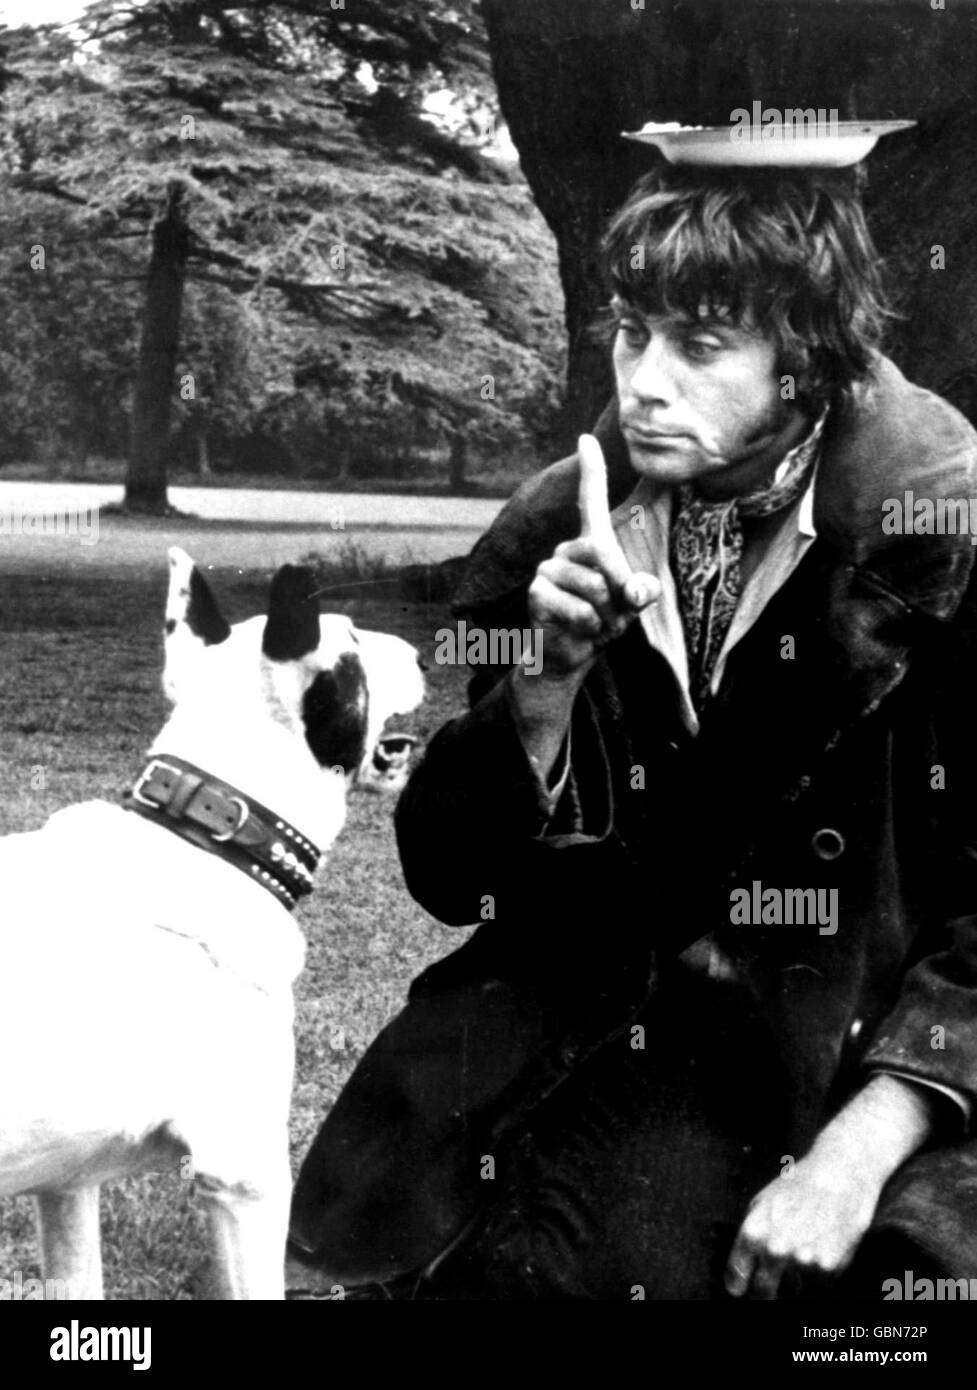 Oliver Reed, who plays Bill Sikes, plays around with one of his co-stars during a break in filming. Stock Photo